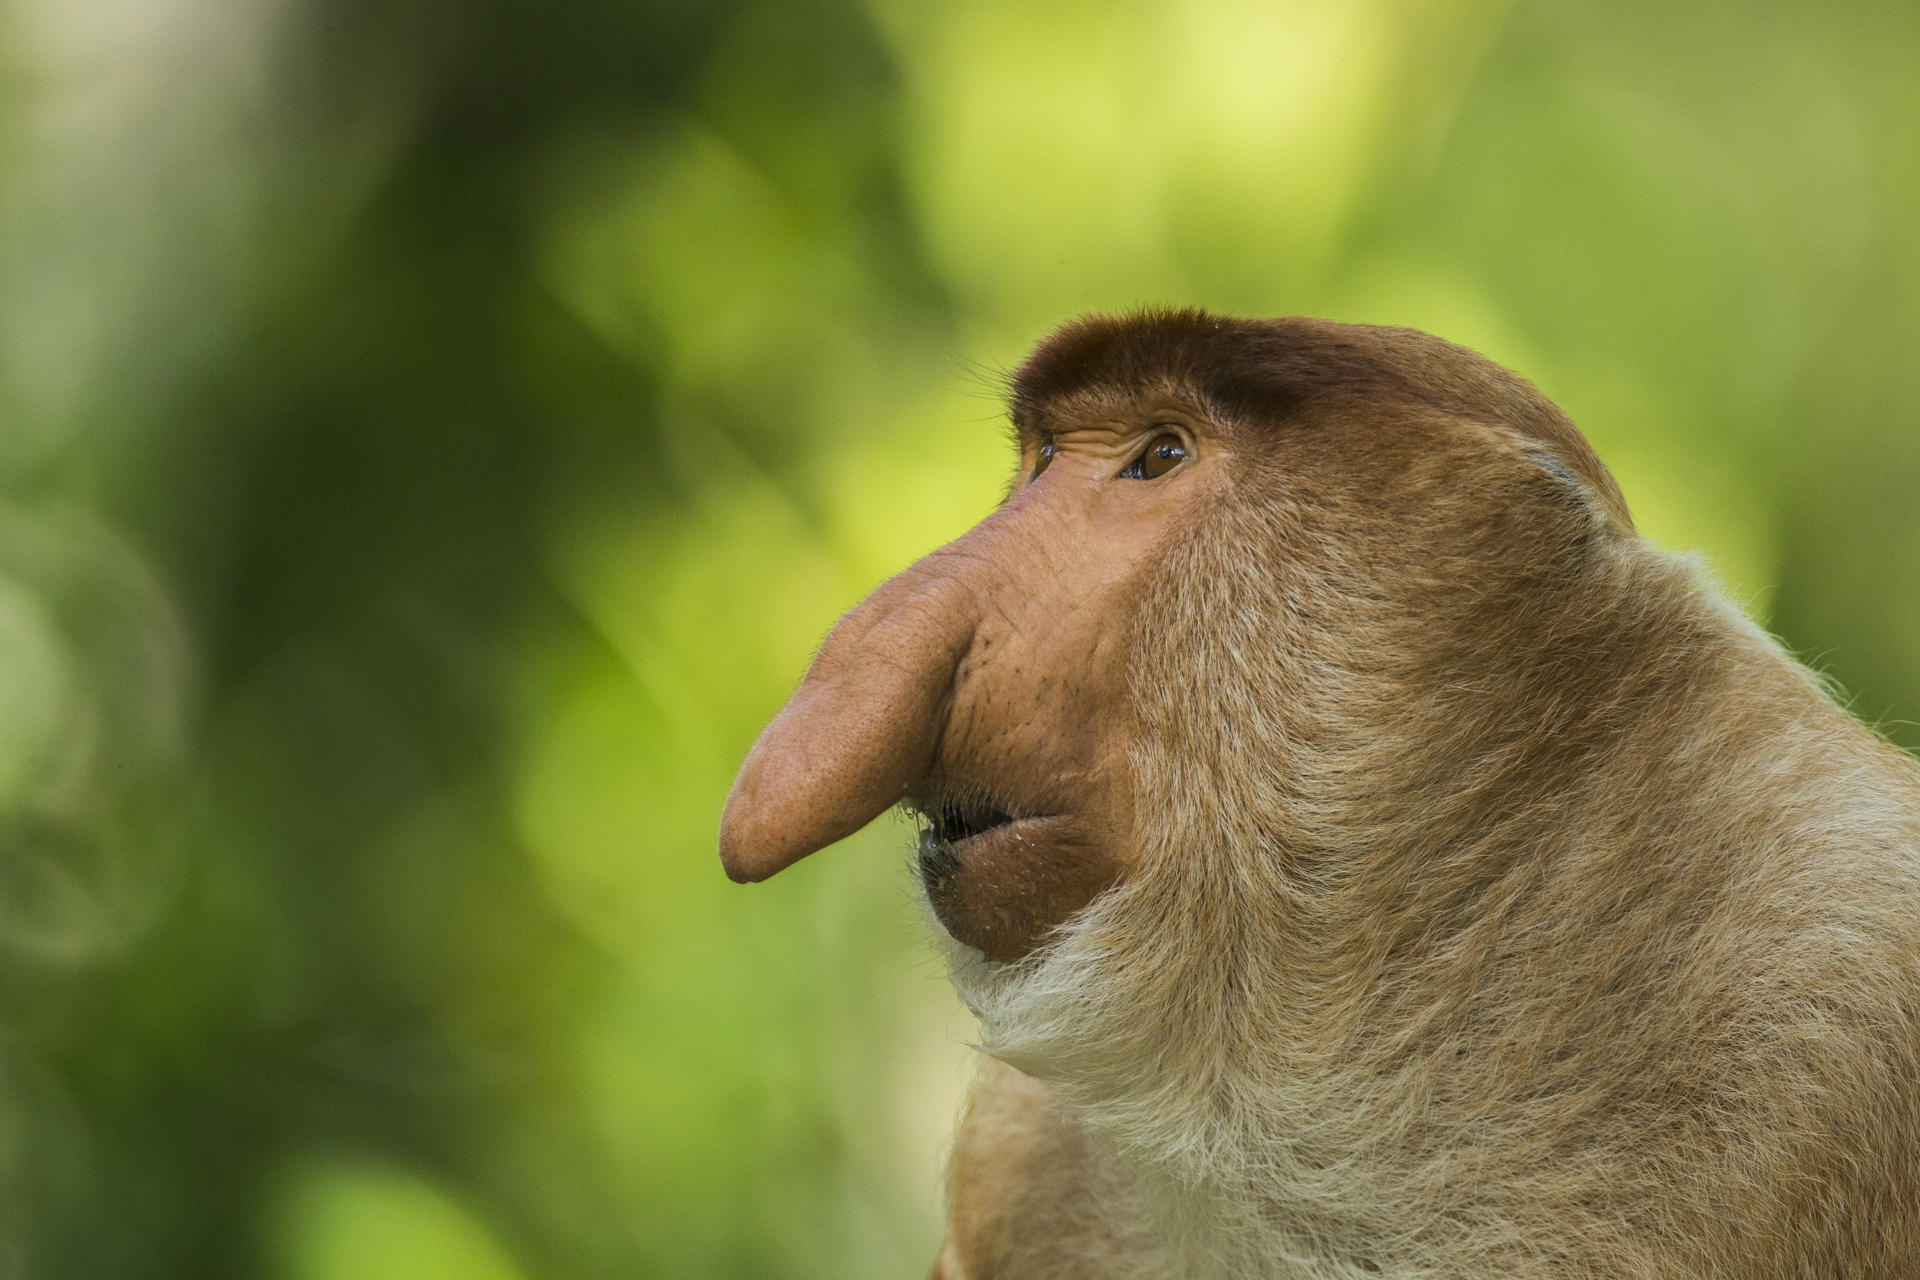  A male Proboscis monkey with the famous elongated nose. The bigger the nose, the higher the standing of the male.&nbsp; 